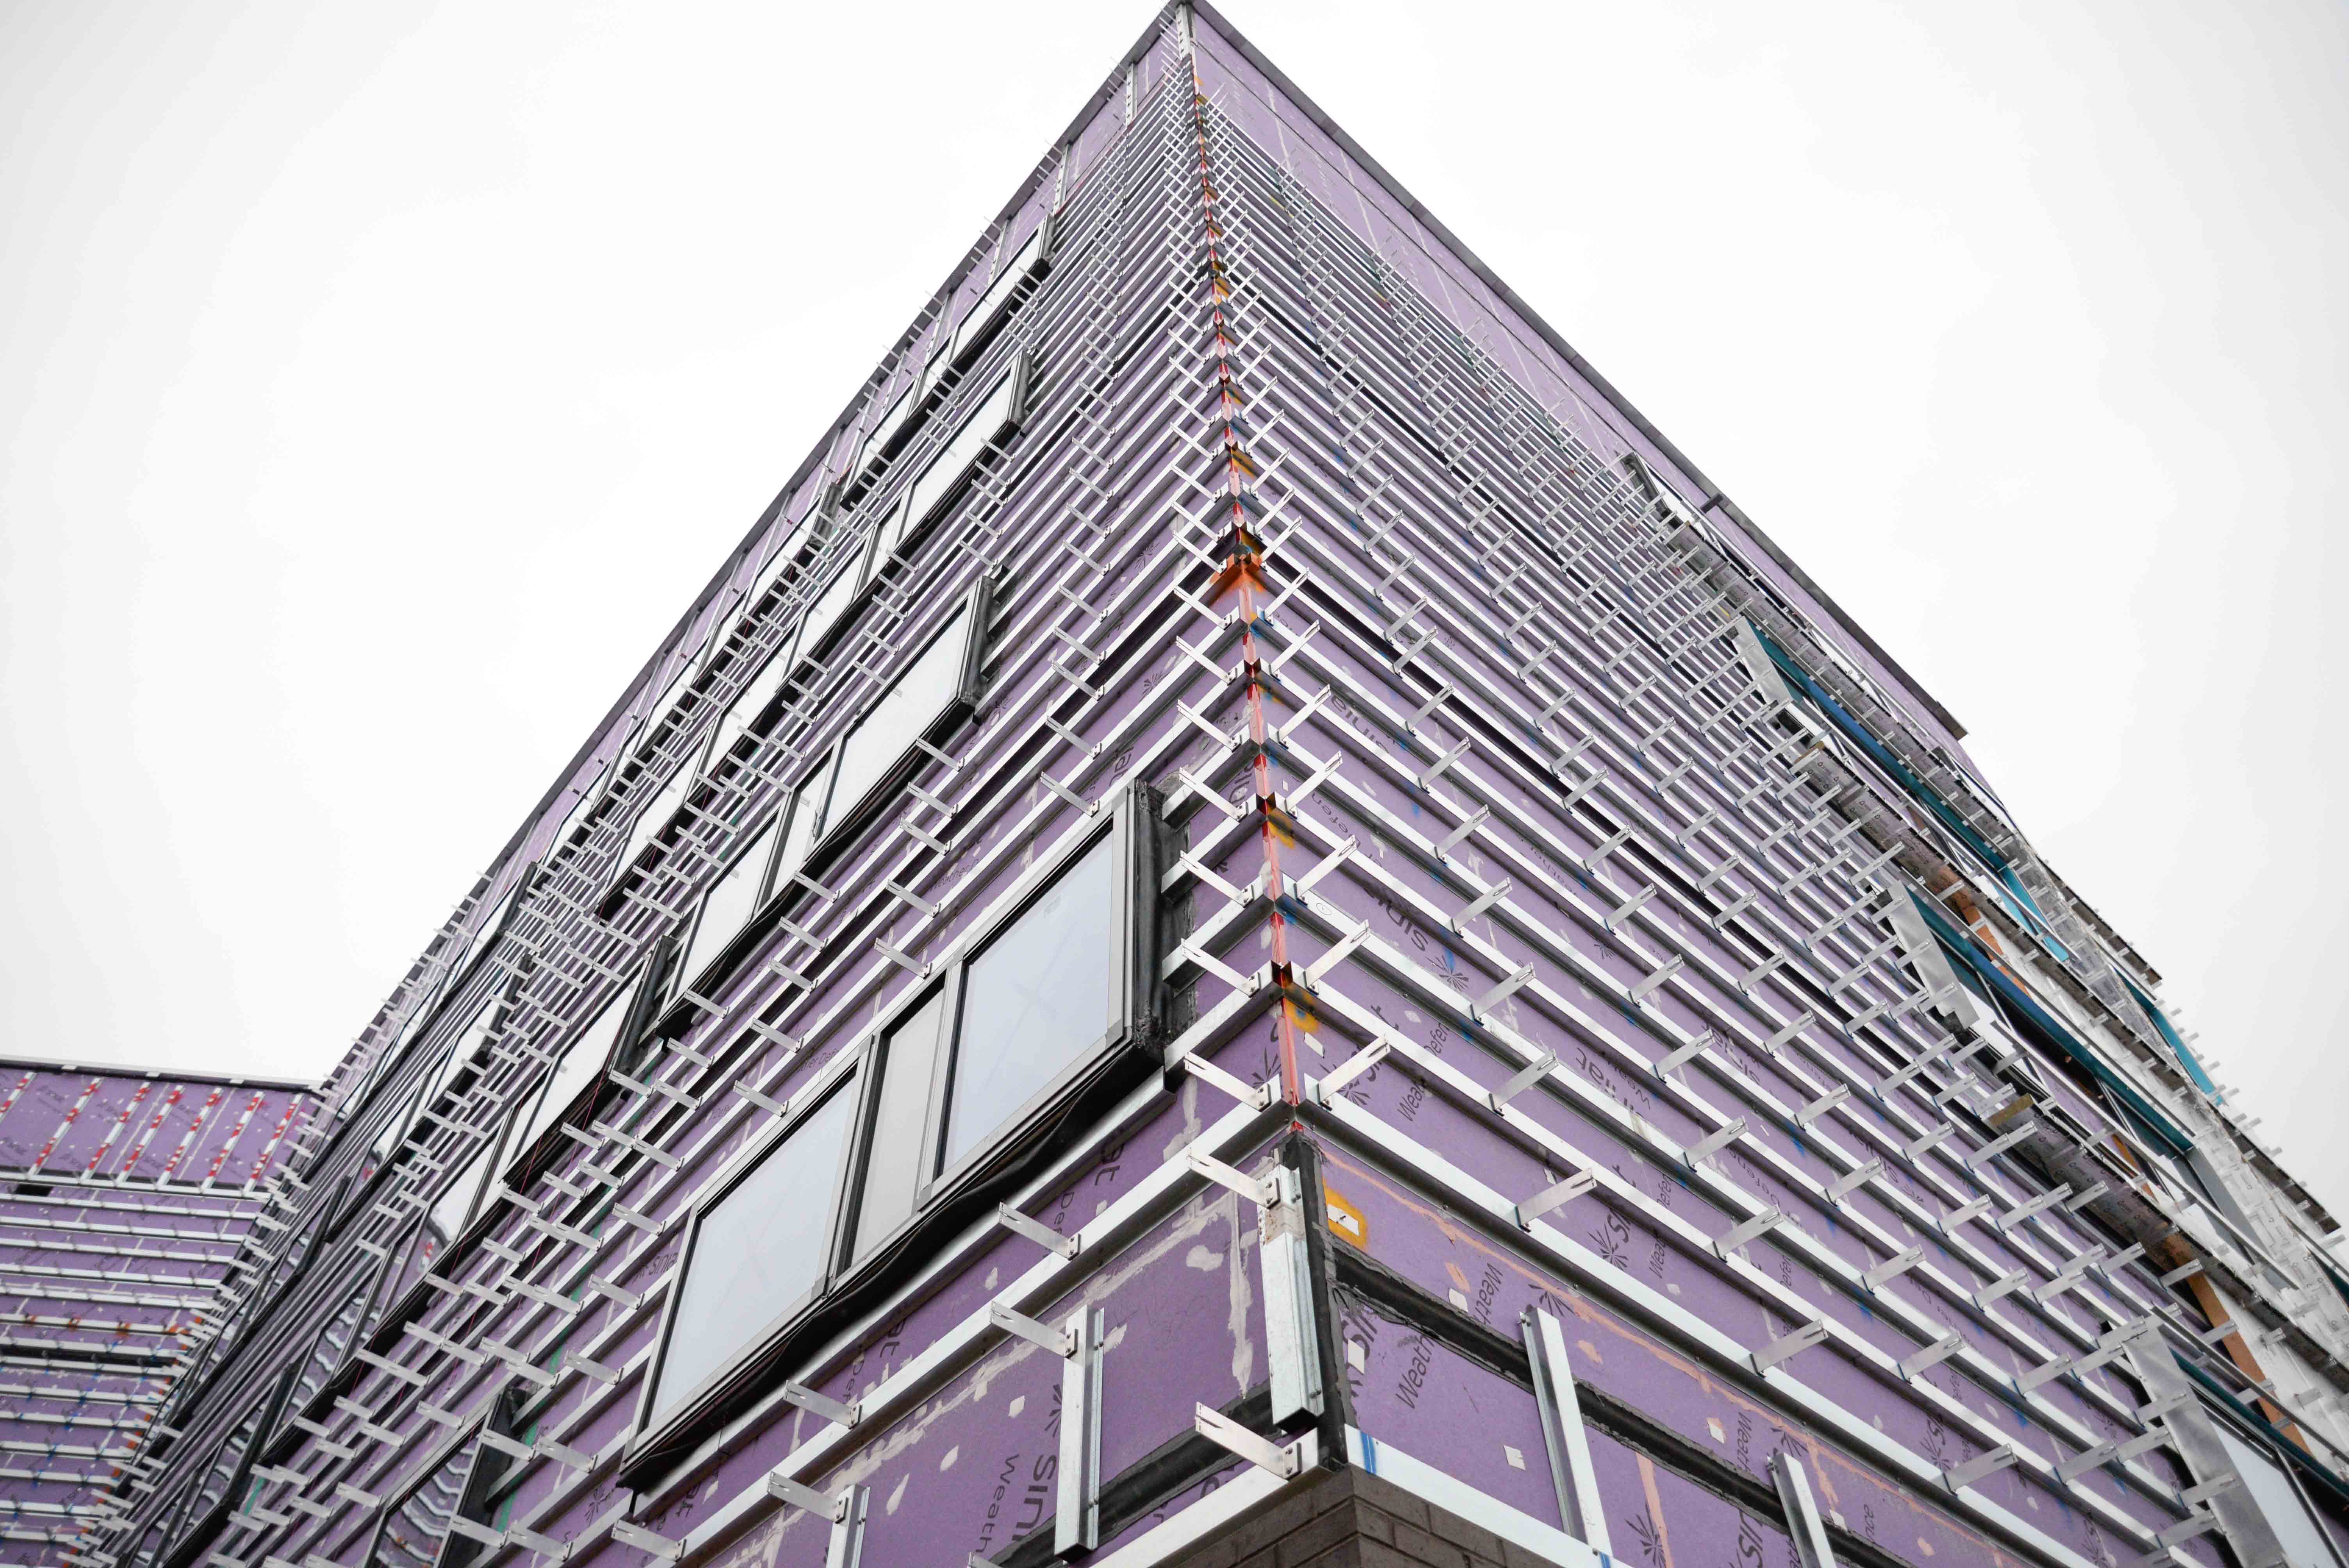 Image of purple insulation on the outside of a building